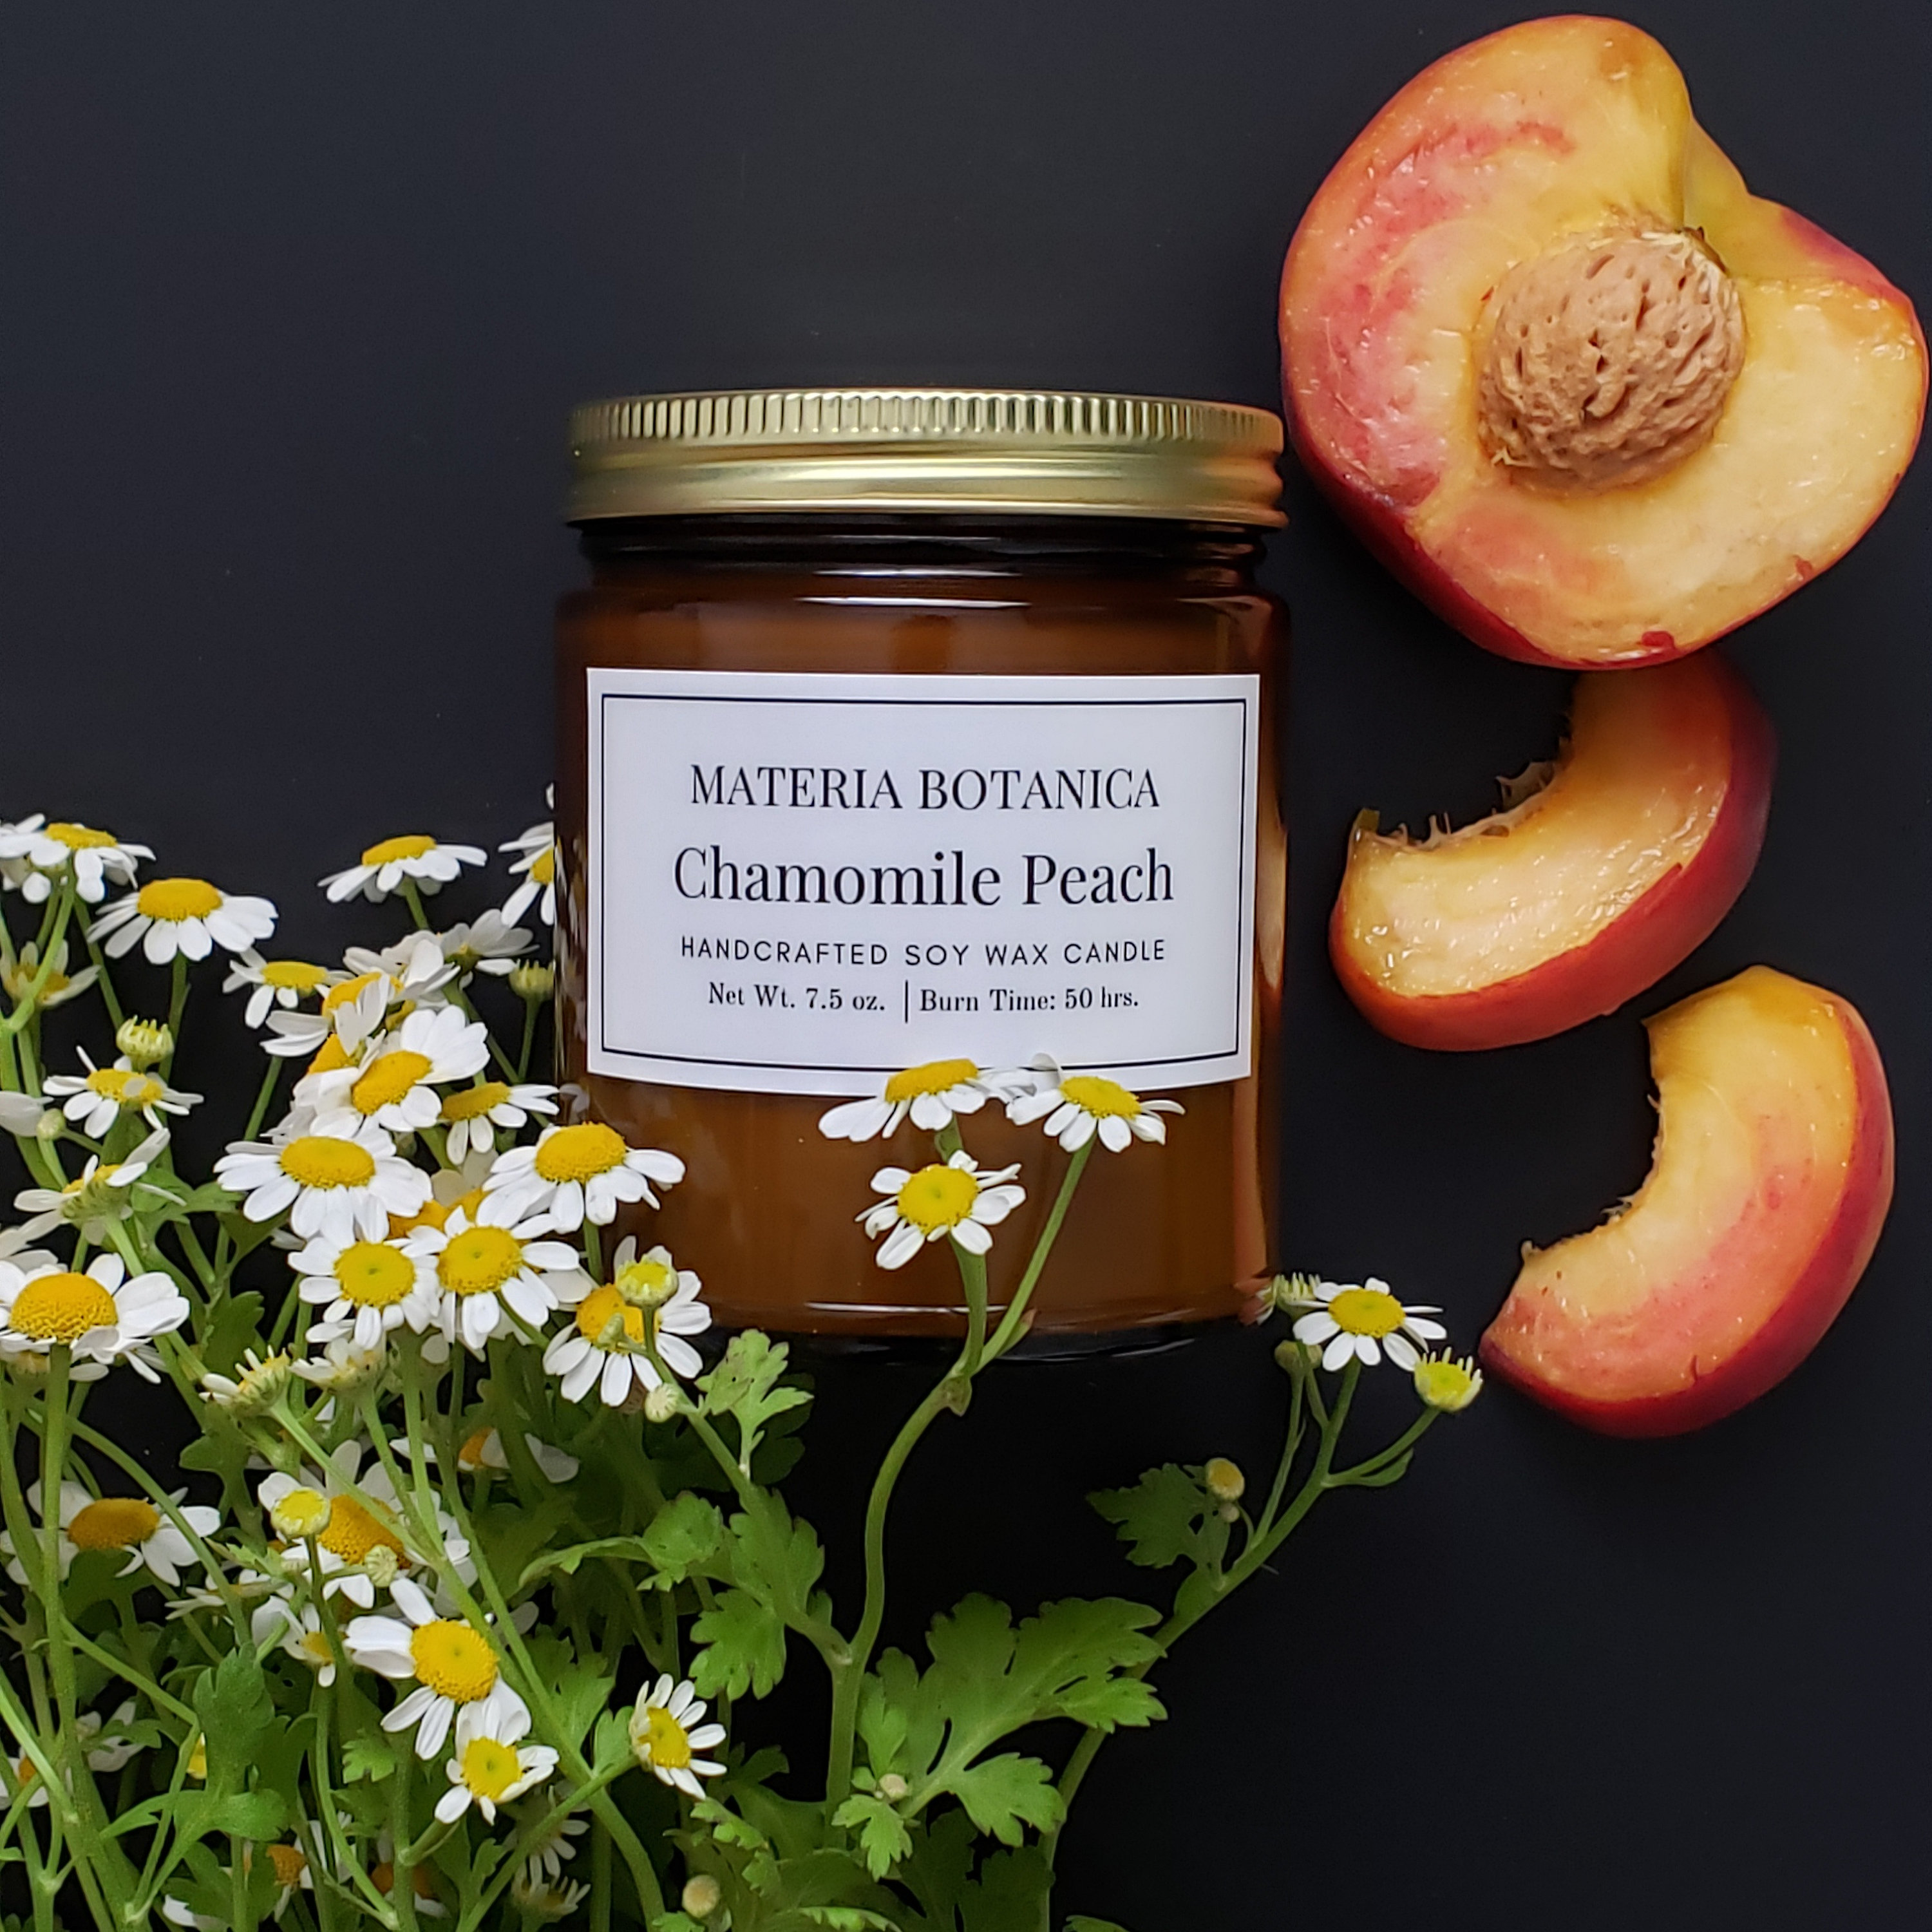 Chamomile Tea - Hand poured organic soy wax melts and wood wick candles